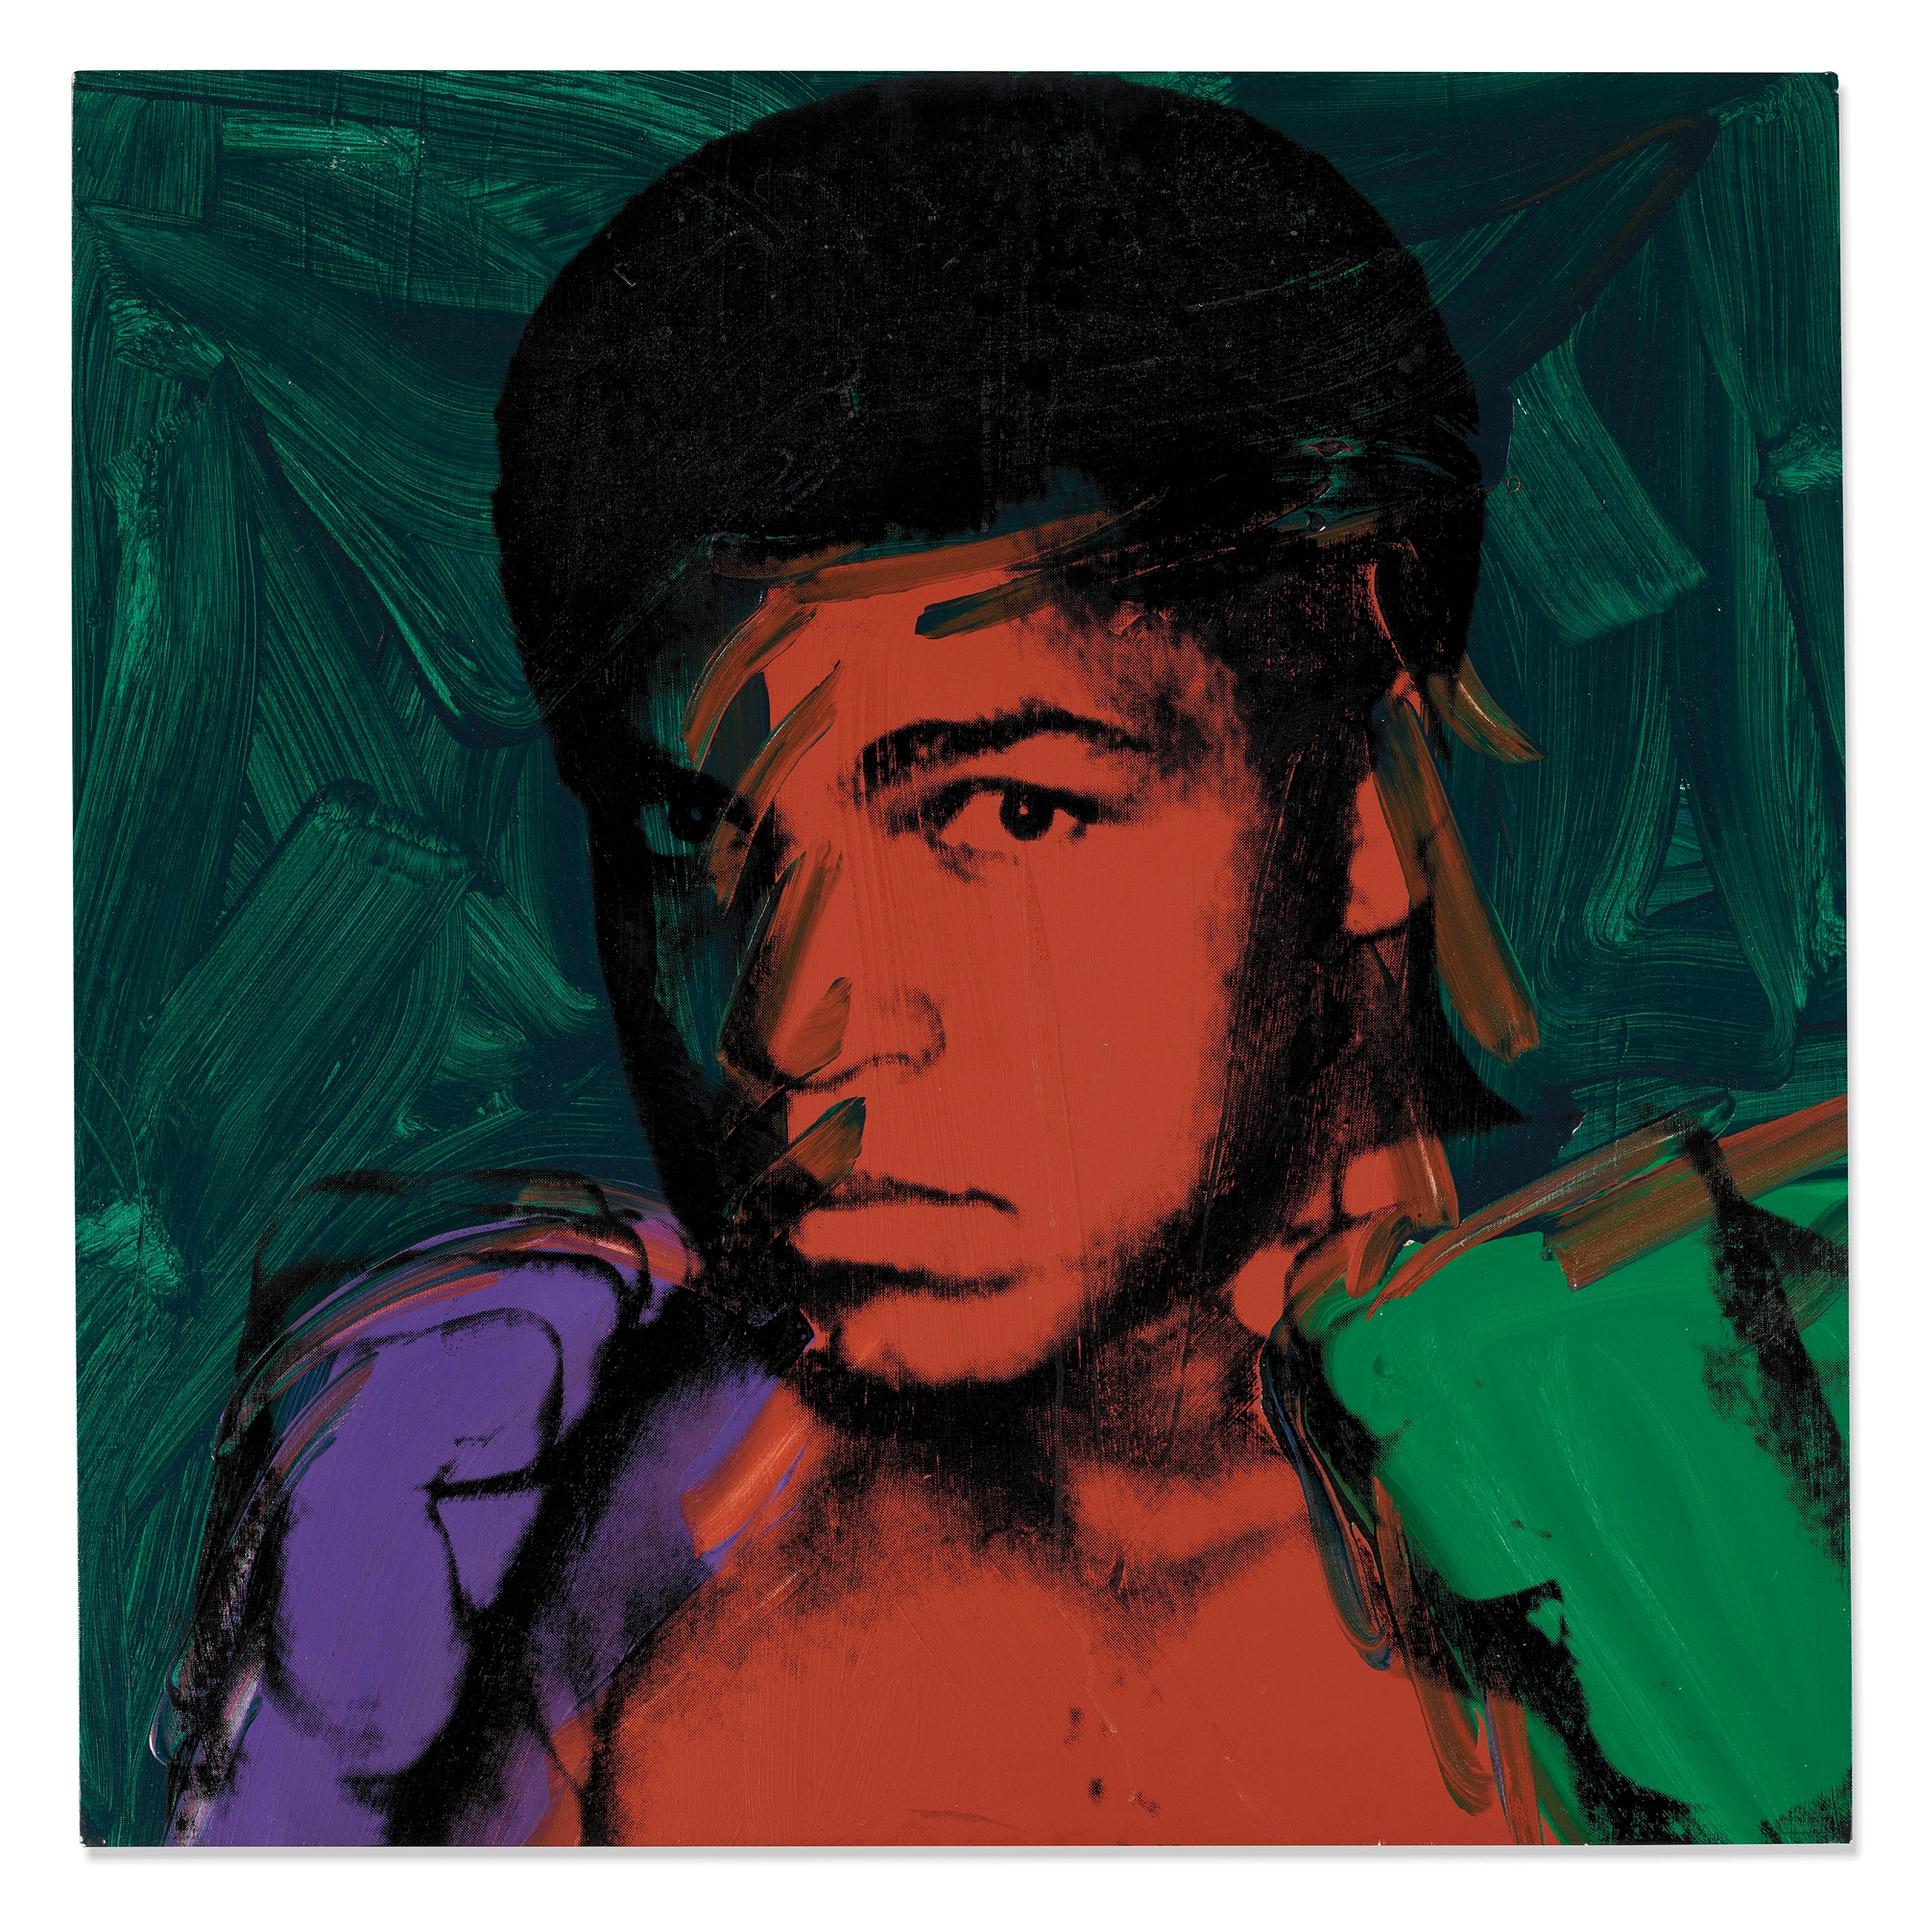 Andy Warhol, Muhammad Ali (1977) sold for almost £5m Courtesy of Christie's